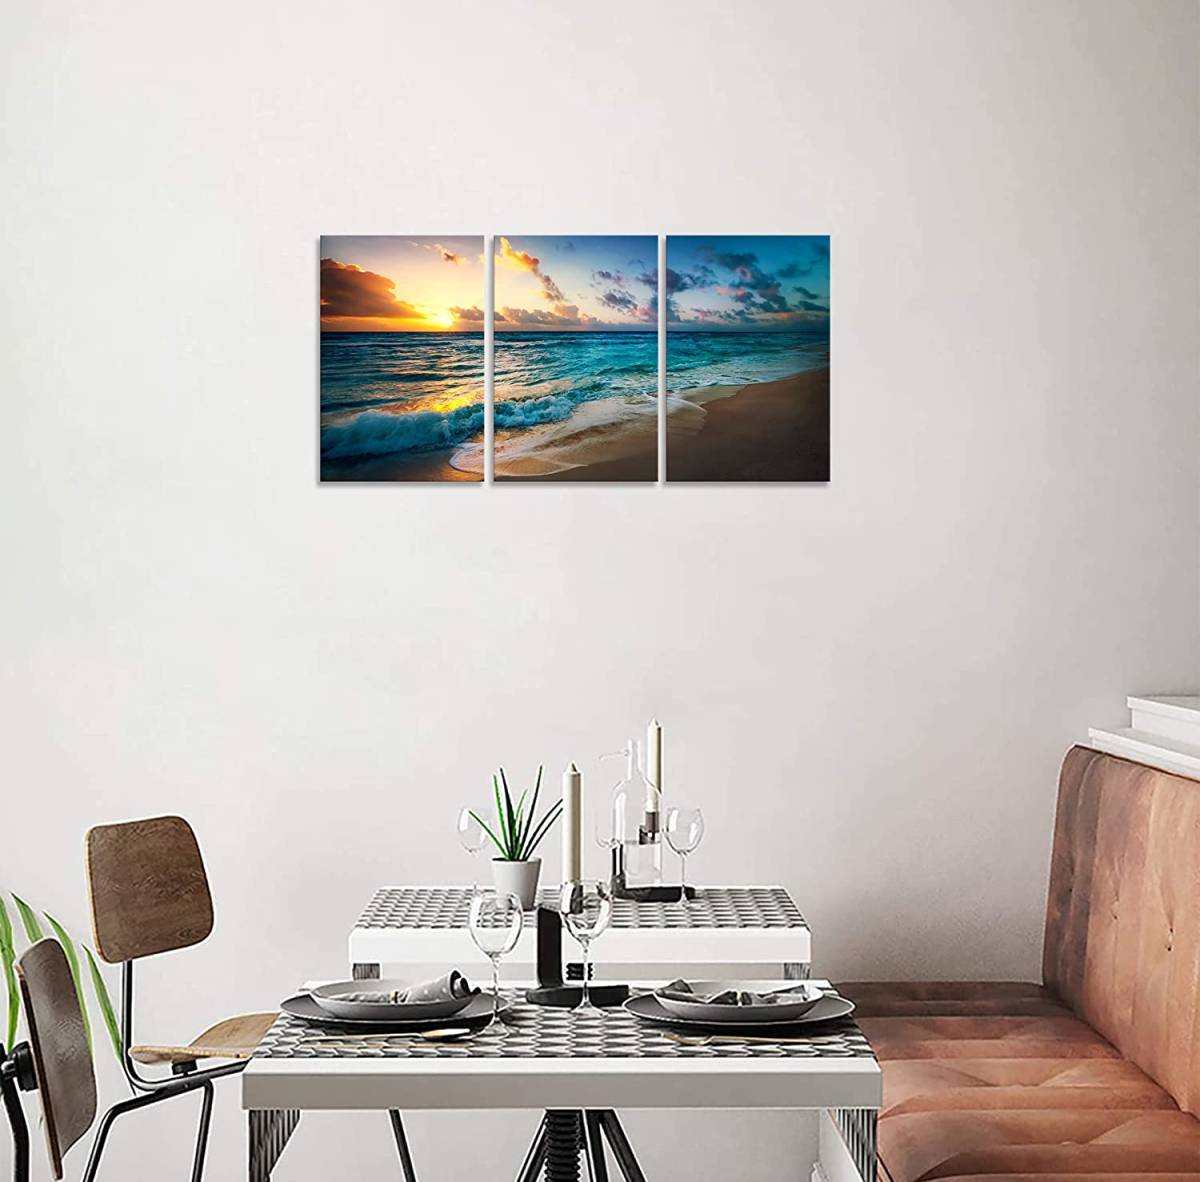 ... 3 sheets art panel sea . day interior ornament part shop decoration nature scenery canvas tree frame picture stylish wall art art pattern change 